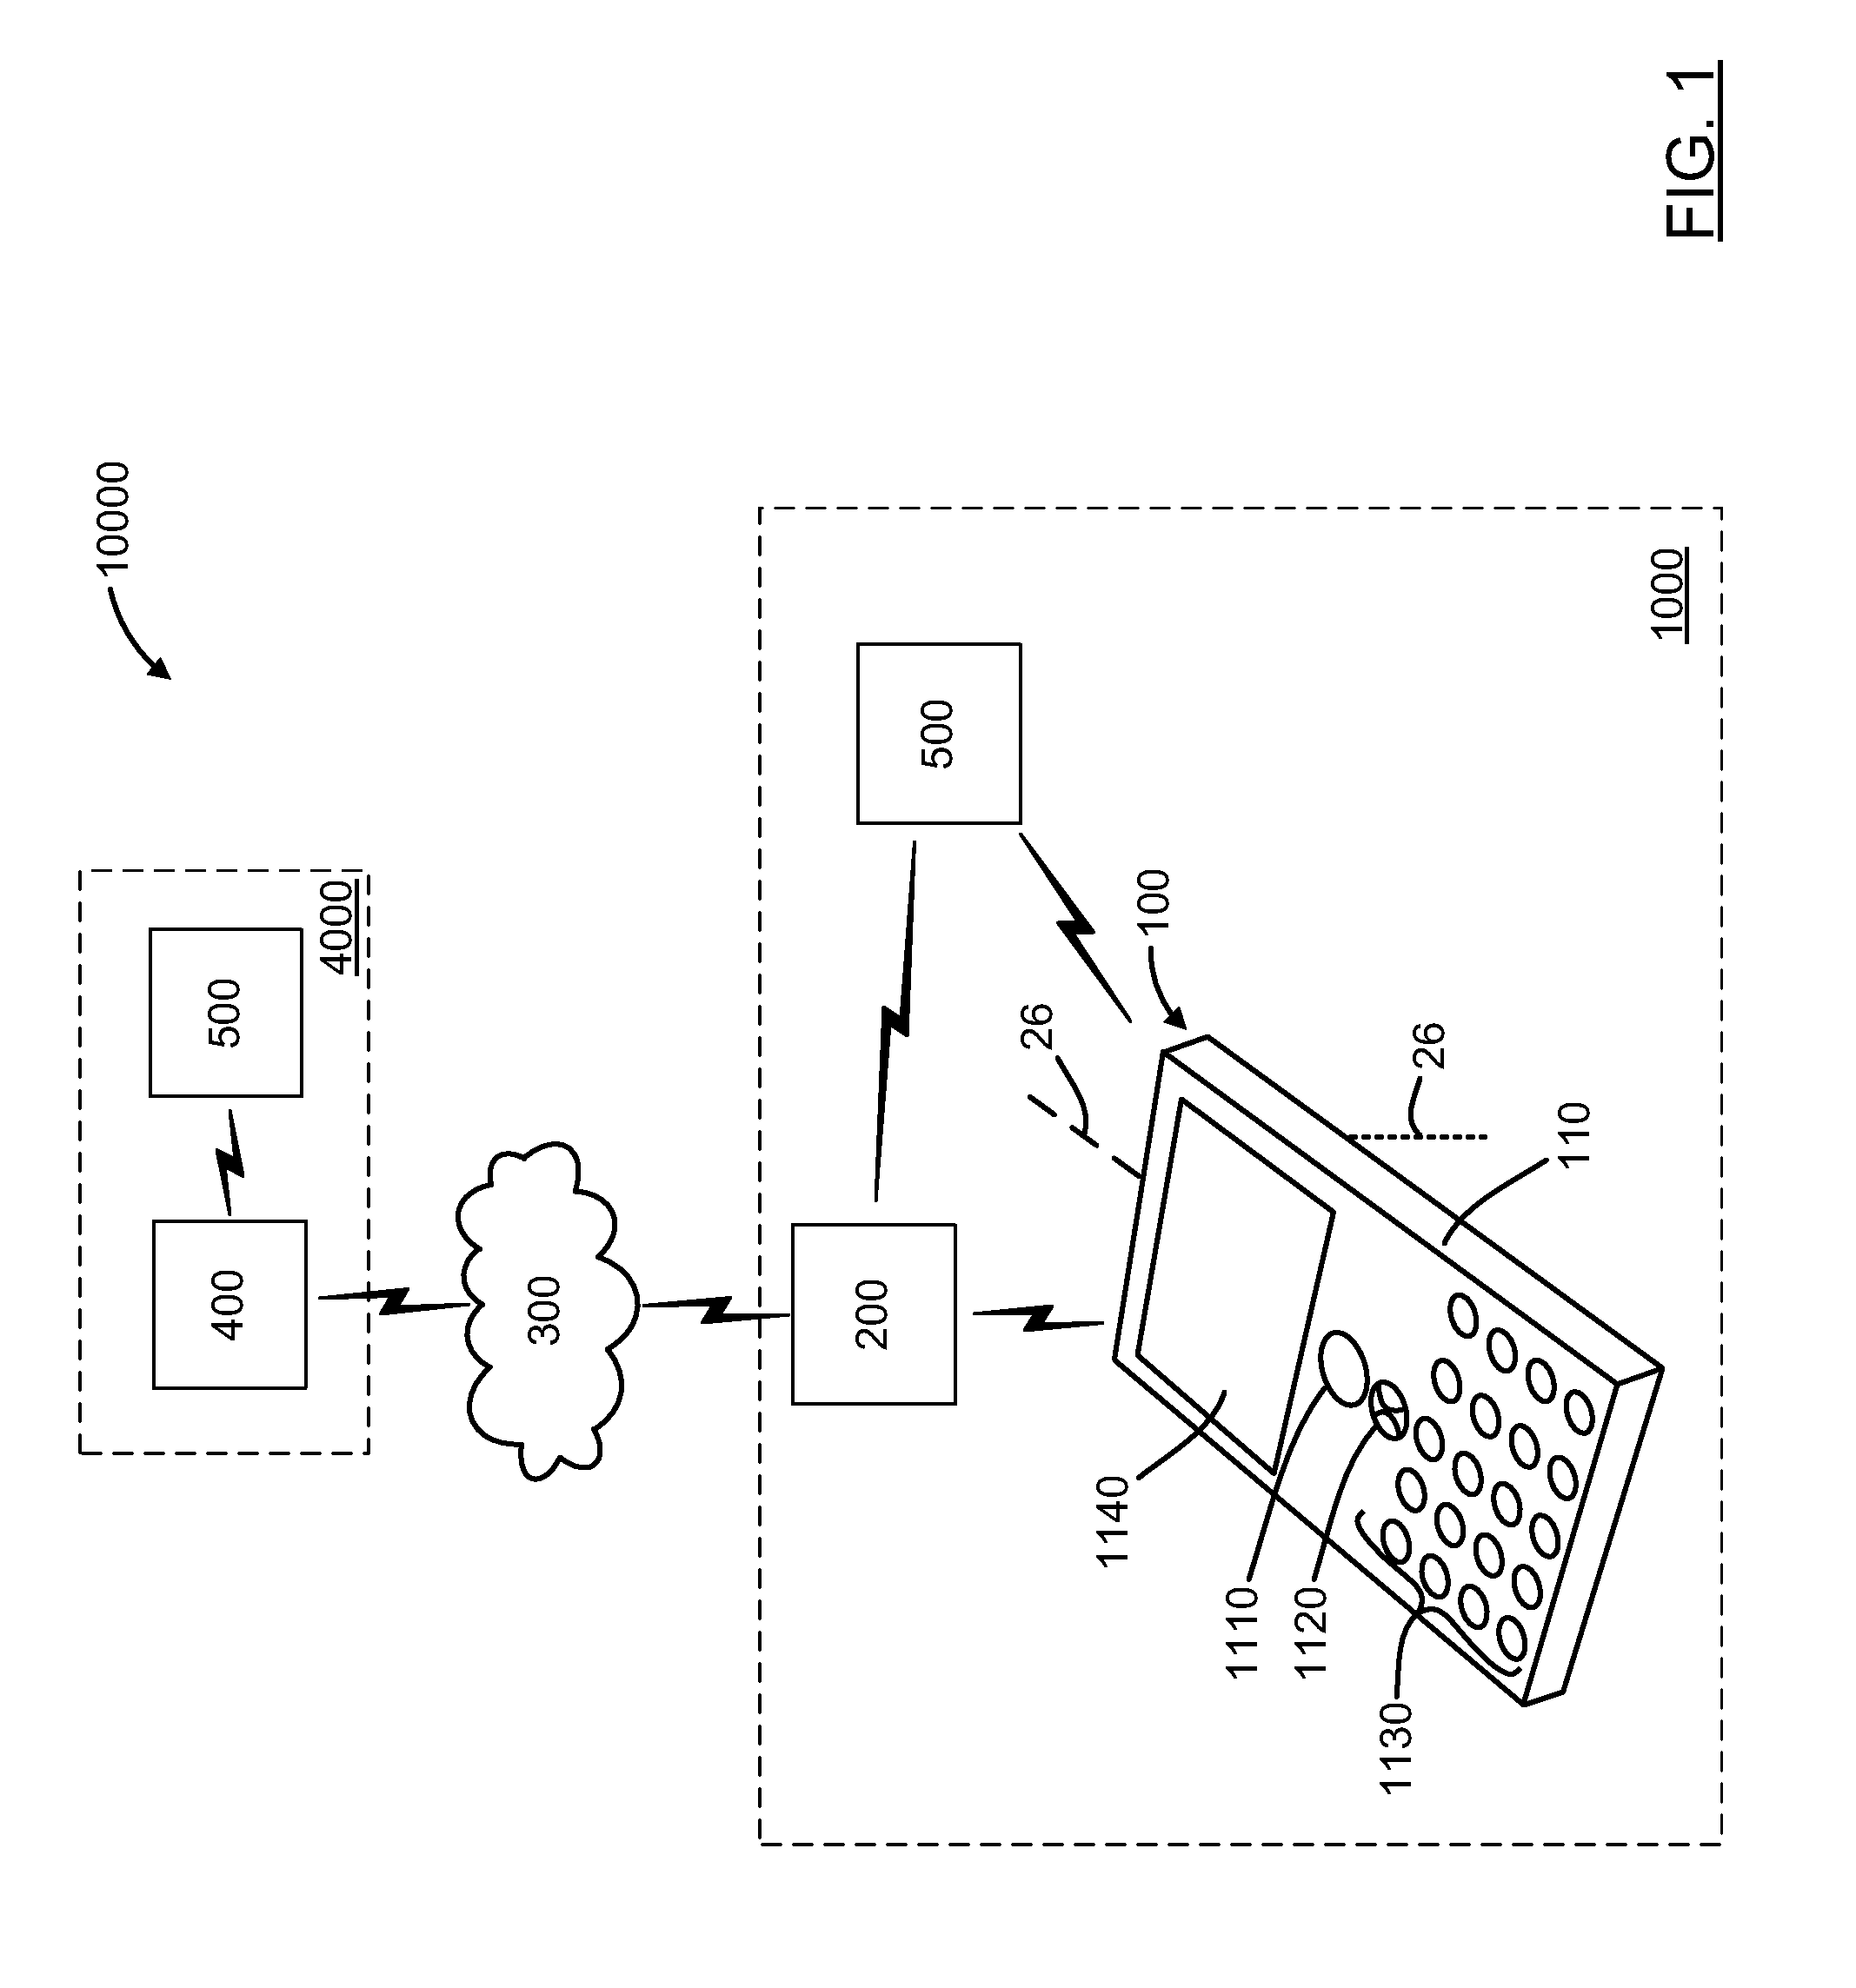 Method and system operative to process color image data